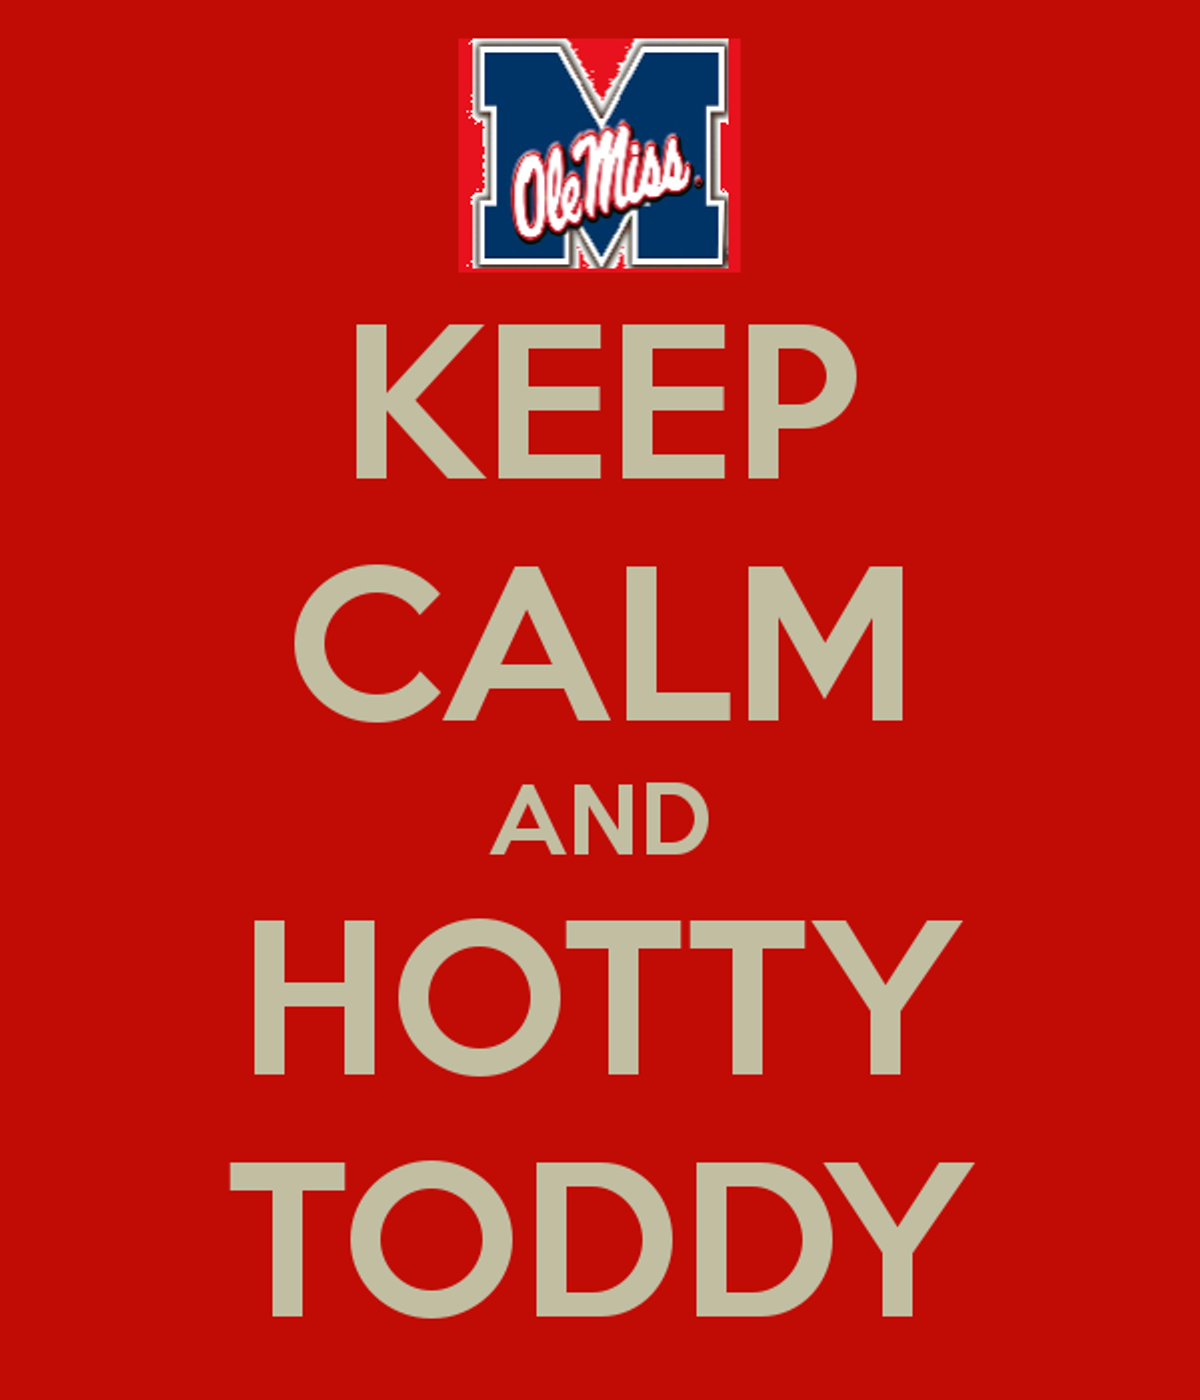 What The Heck Is Hotty Toddy?!